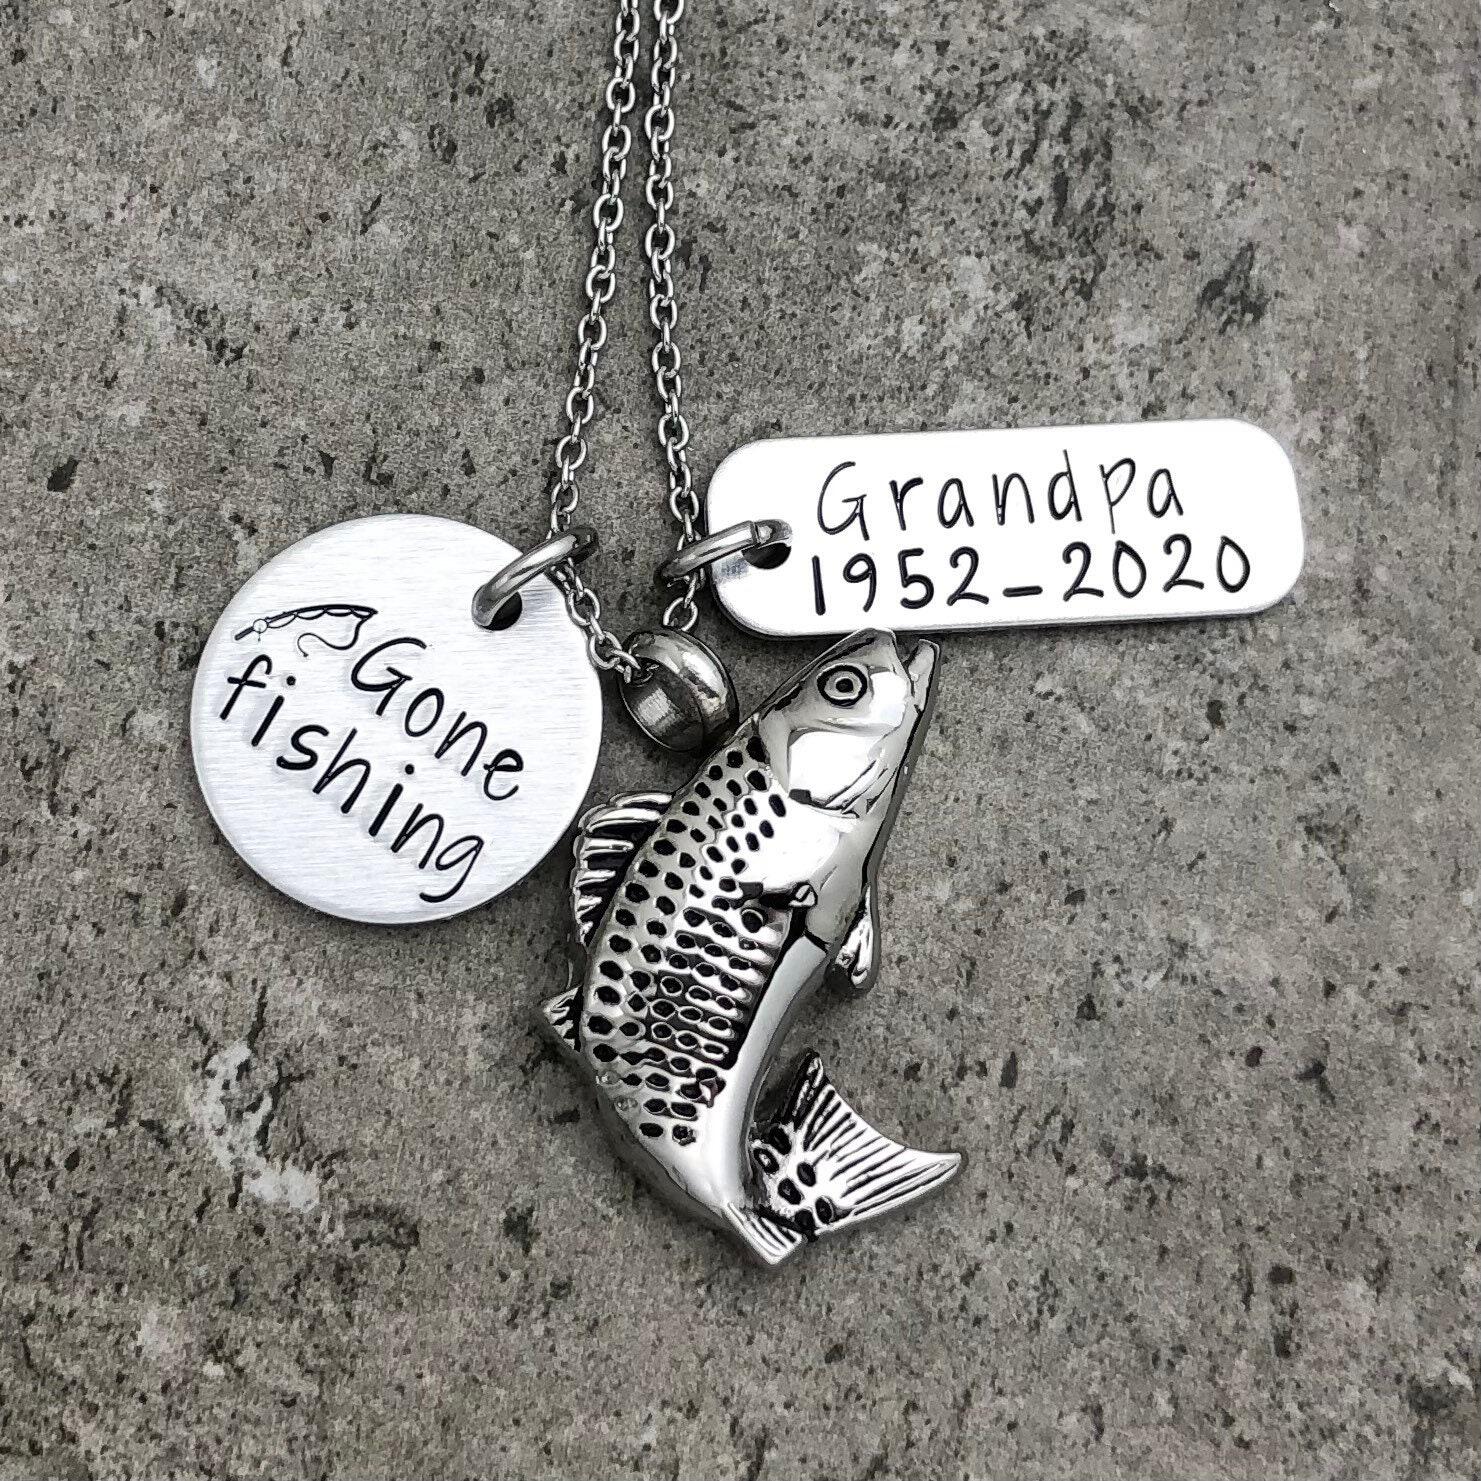  Fishing in Heaven Urn Necklace for ashes Fisherman Outdoorsman  Remembrance Birthstone Necklace Cremation Jewelry  (Customized(Birthstone,Initial,engraving)) : Clothing, Shoes & Jewelry